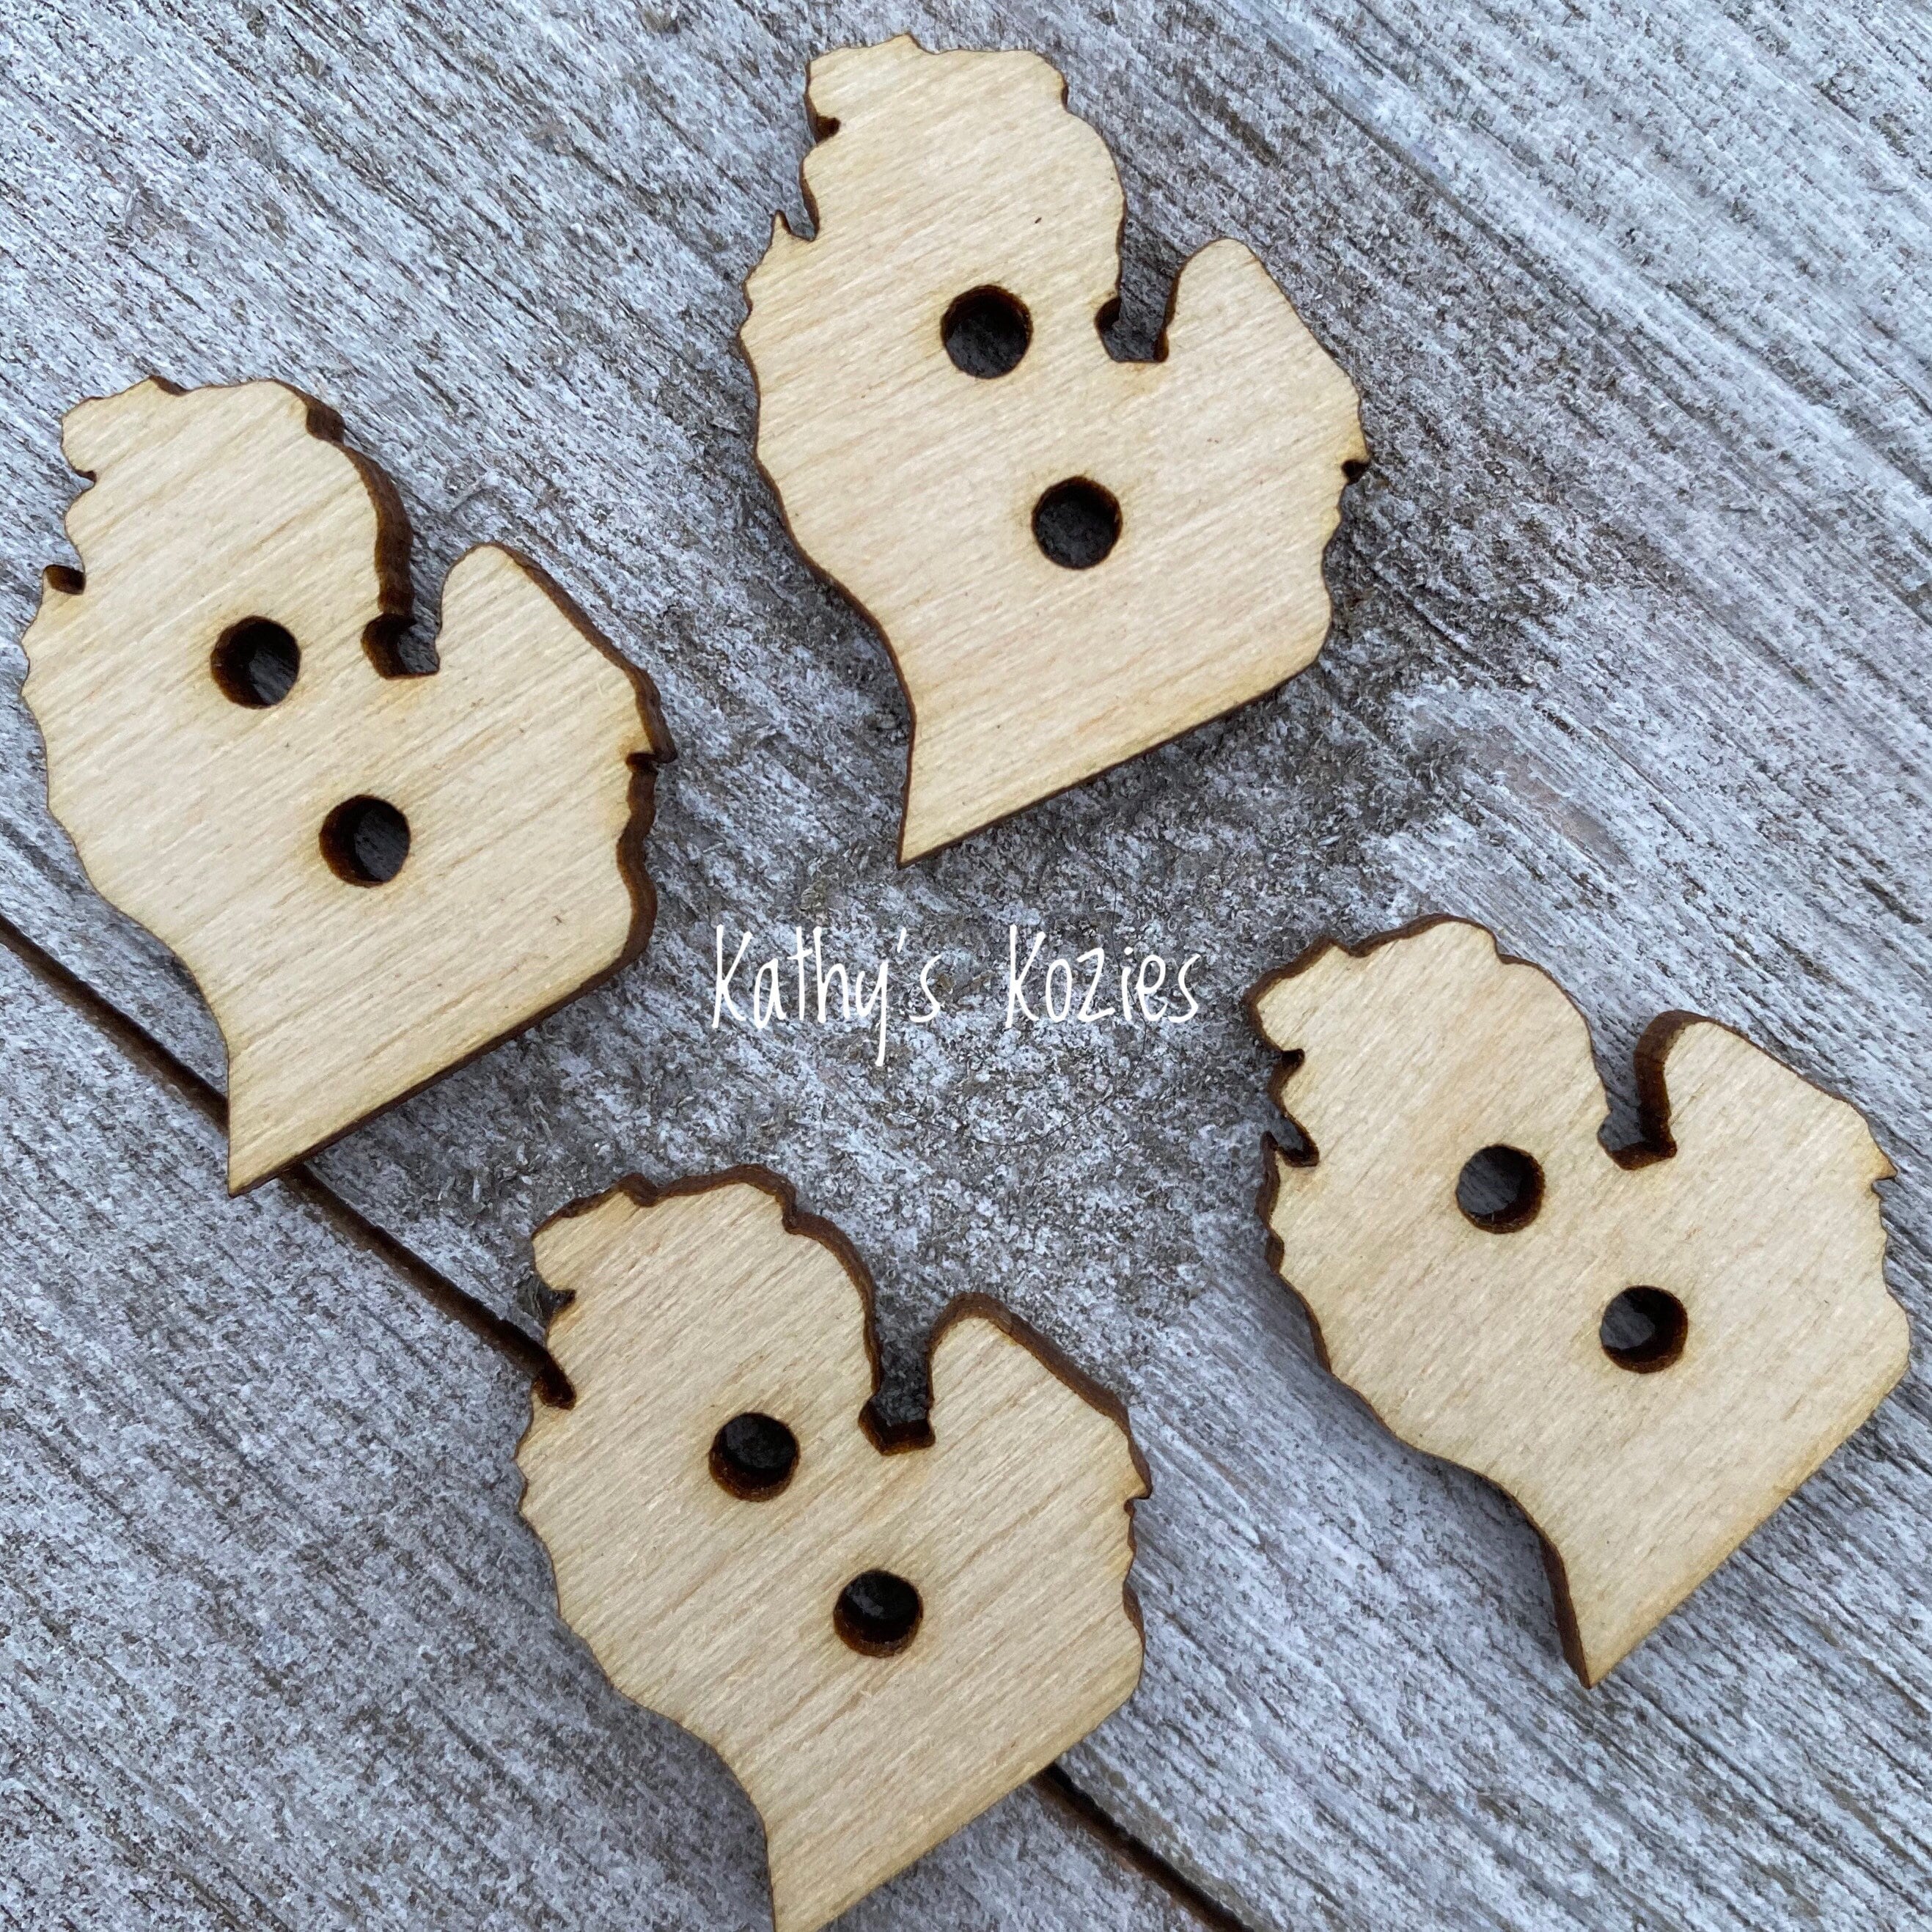 Michigan and UP Engraved Wood Buttons 1 inch (25 mm), Upper Peninsula  buttons